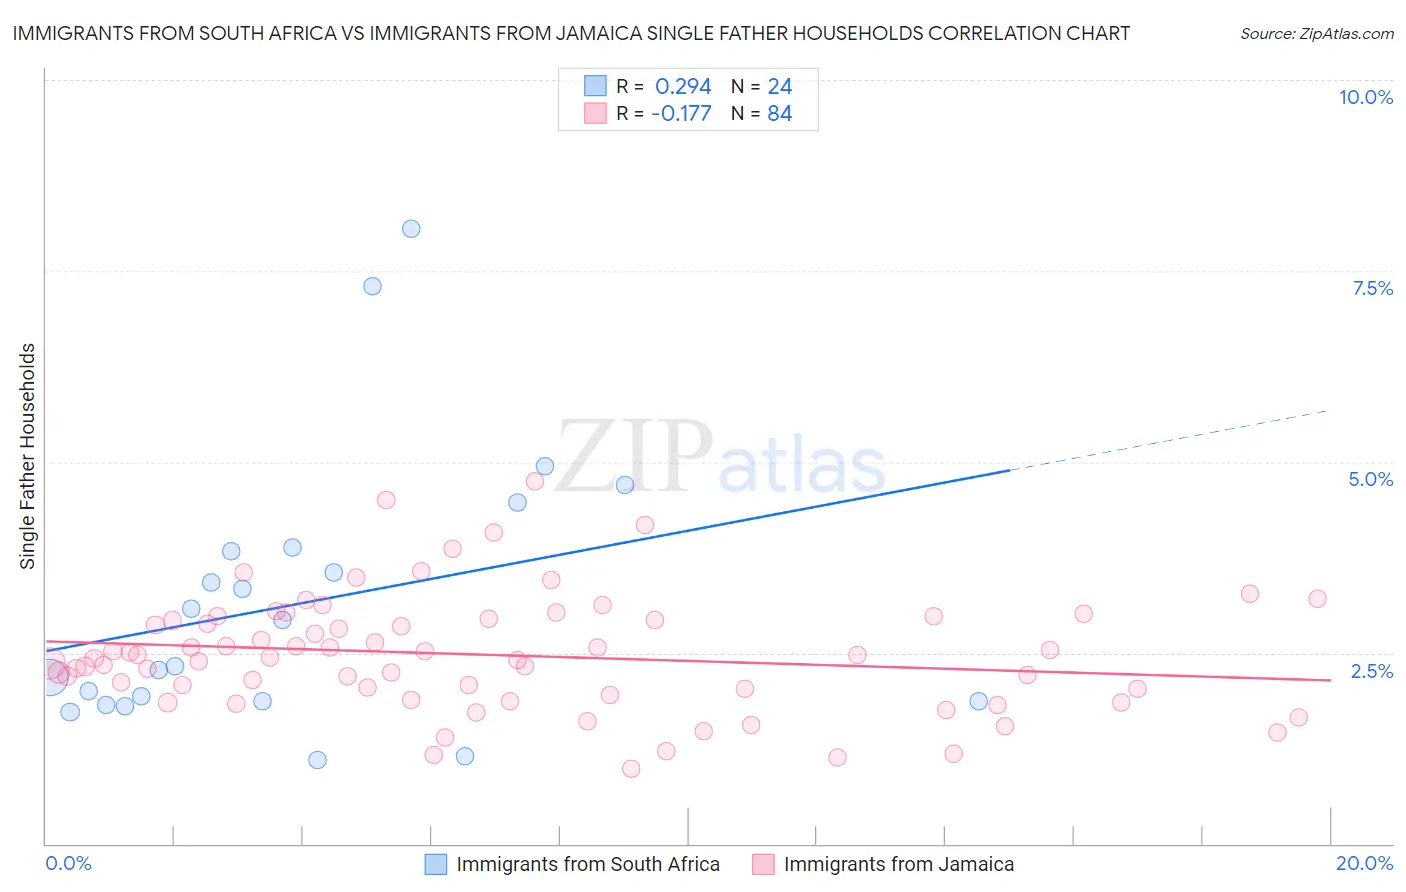 Immigrants from South Africa vs Immigrants from Jamaica Single Father Households